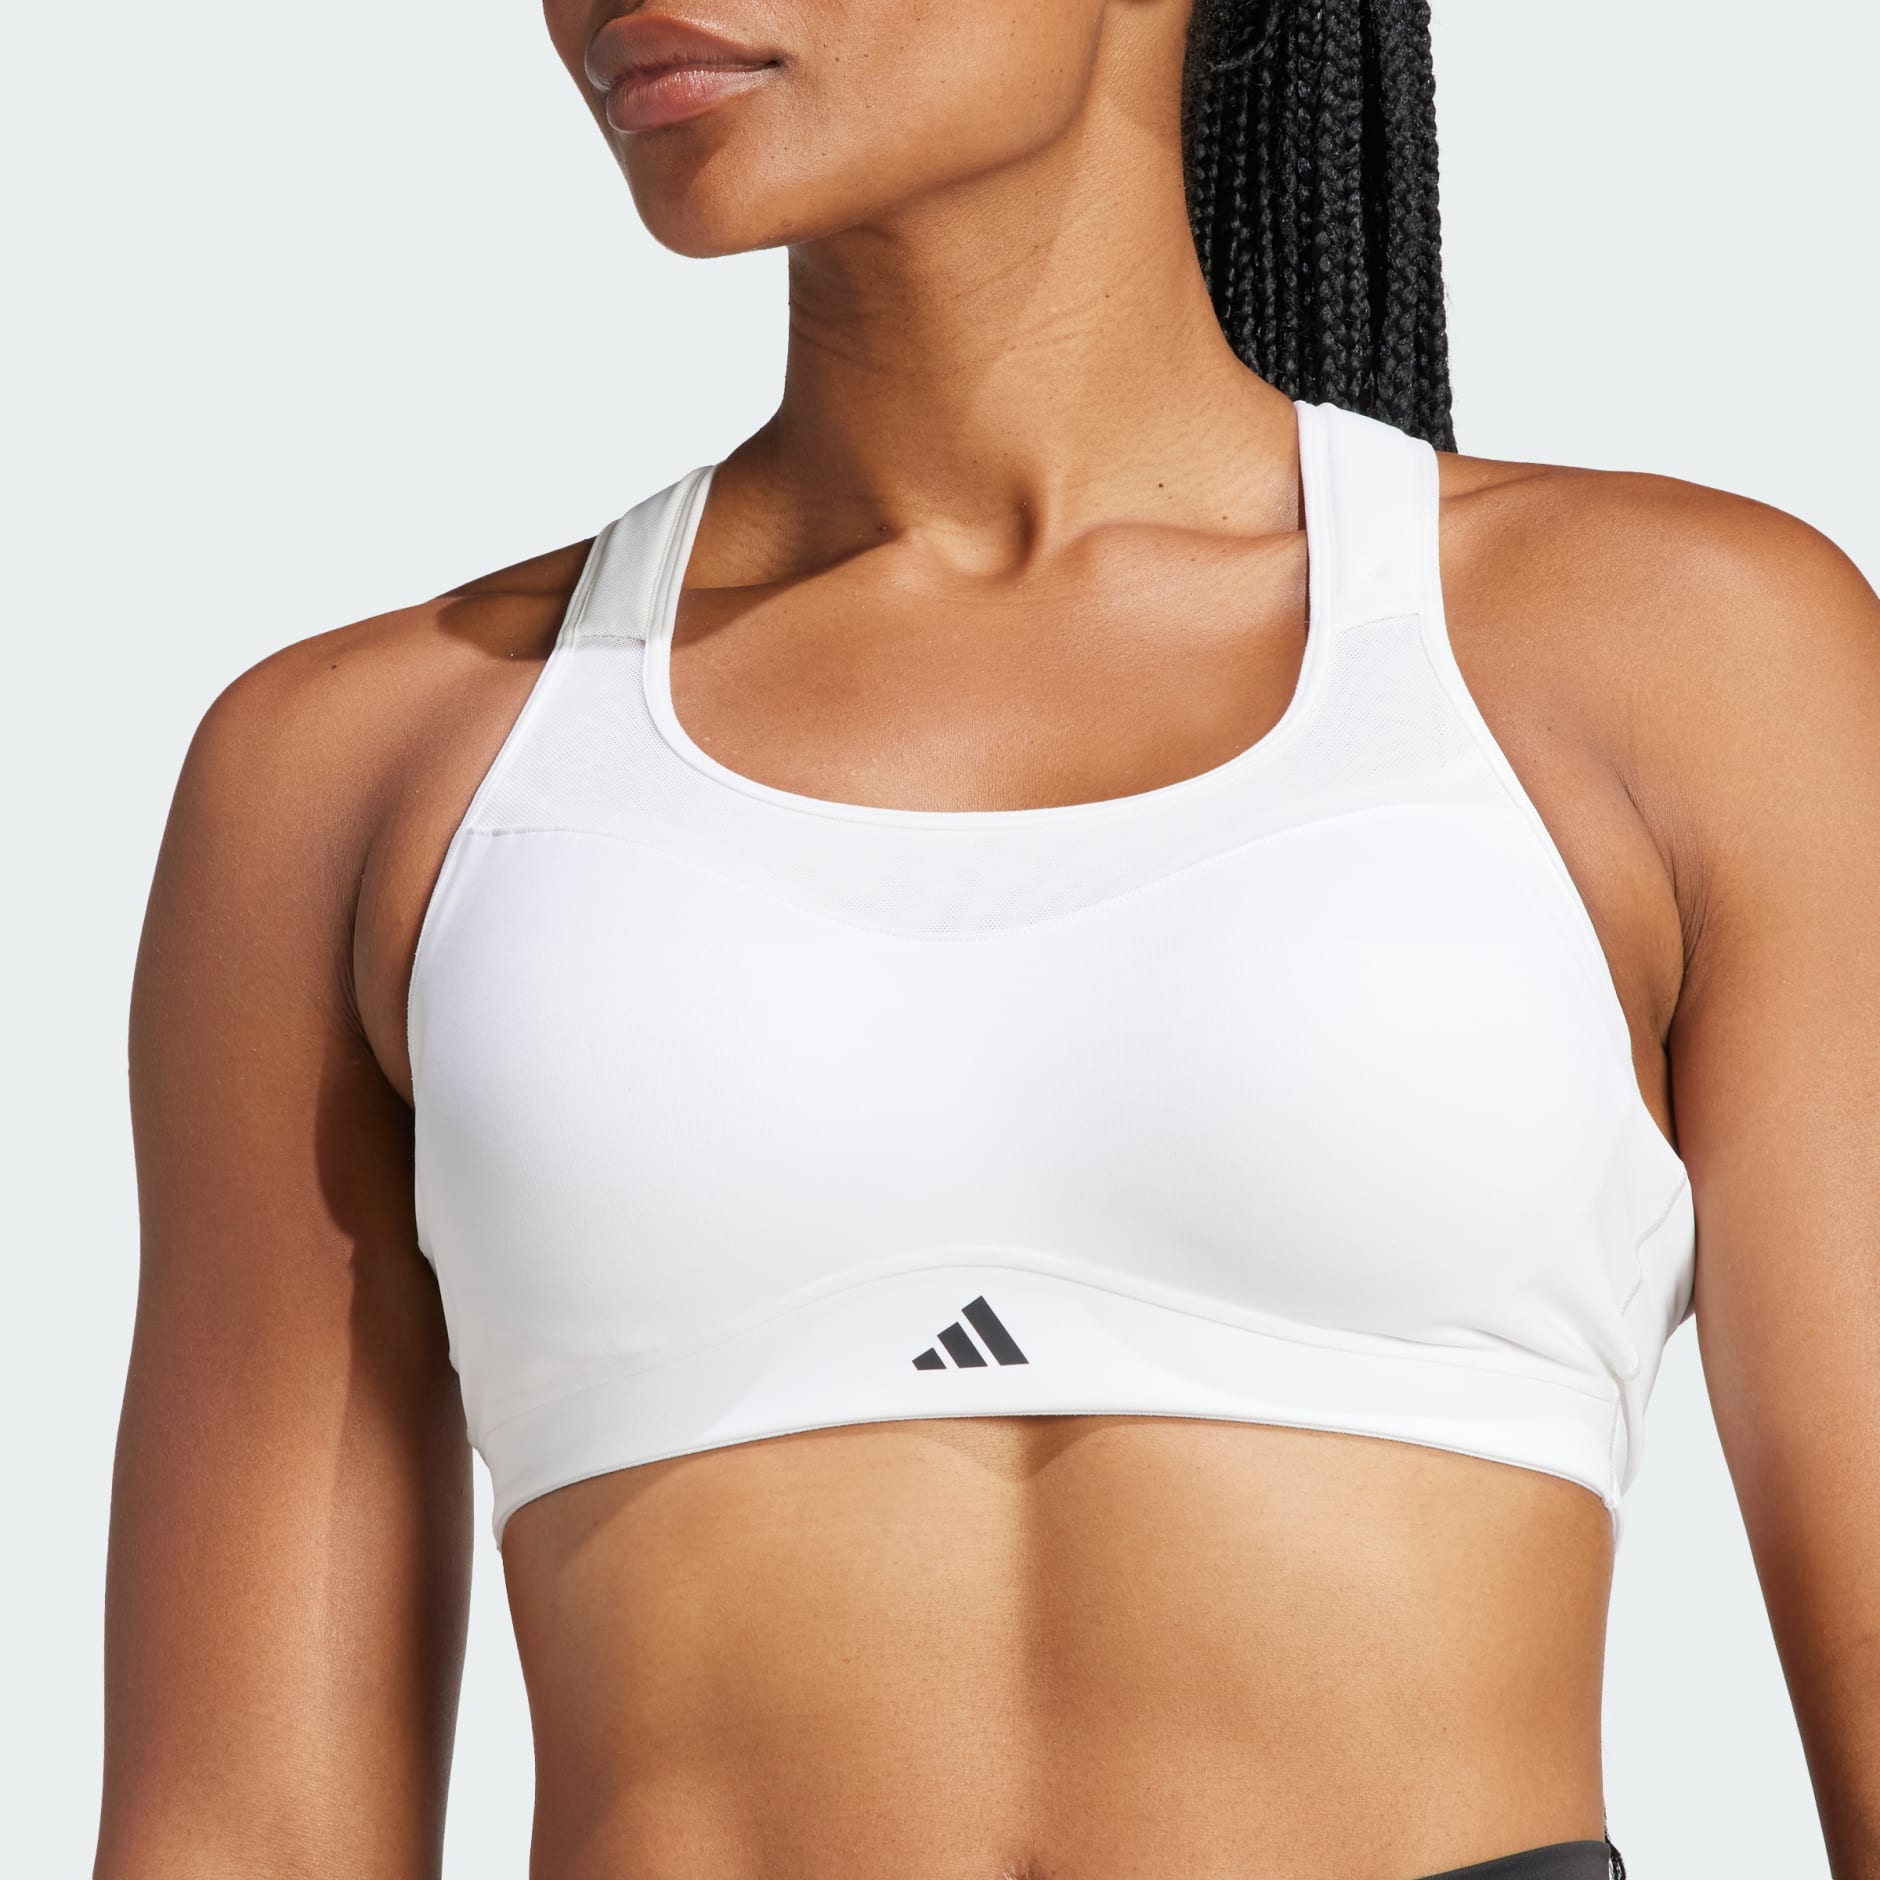 Women's Clothing - adidas TLRD Impact Training High-Support Bra - White